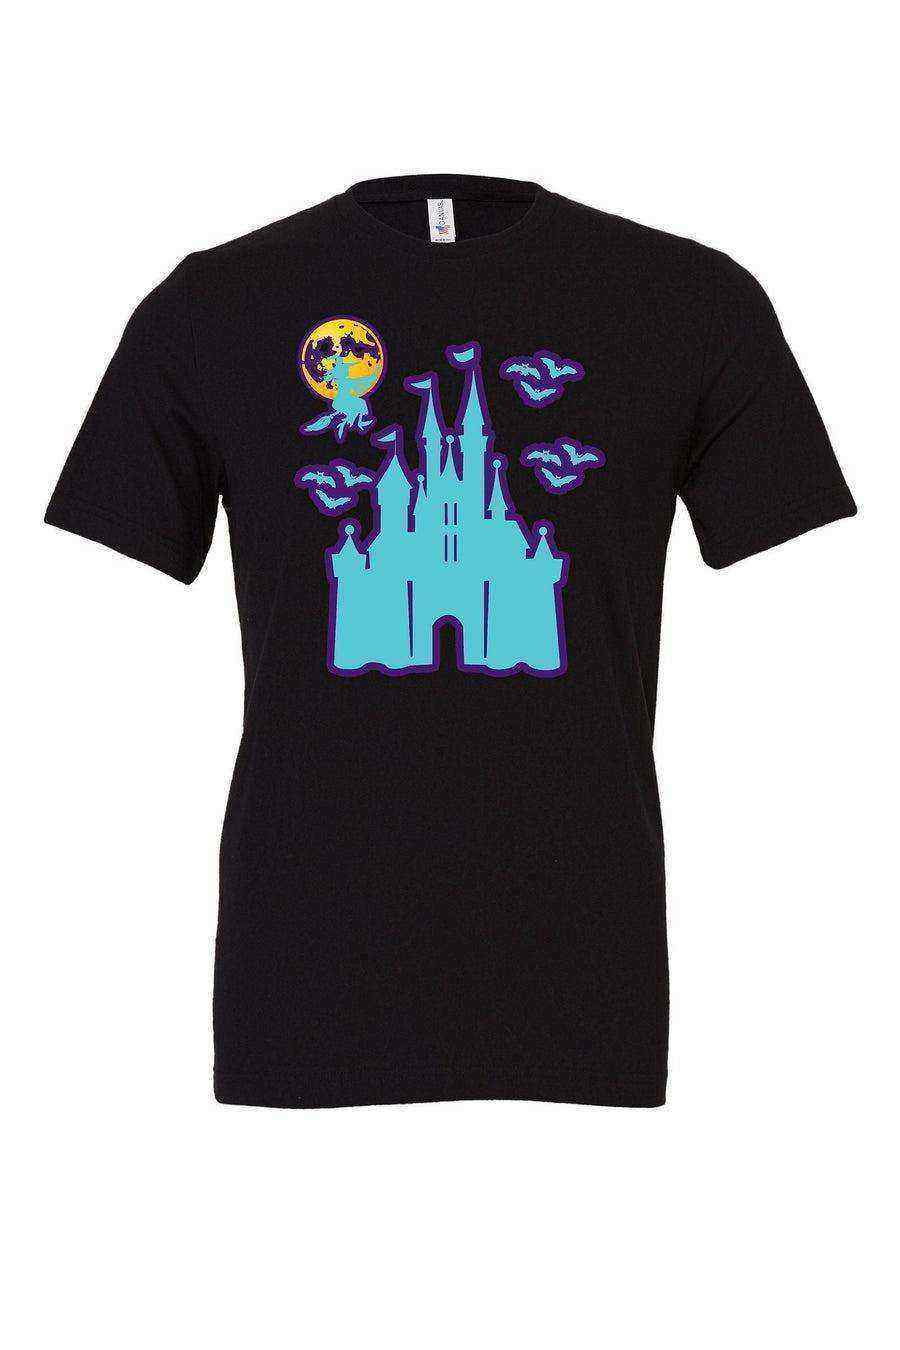 Youth | Haunted Castle Shirt | Halloween - Dylan's Tees